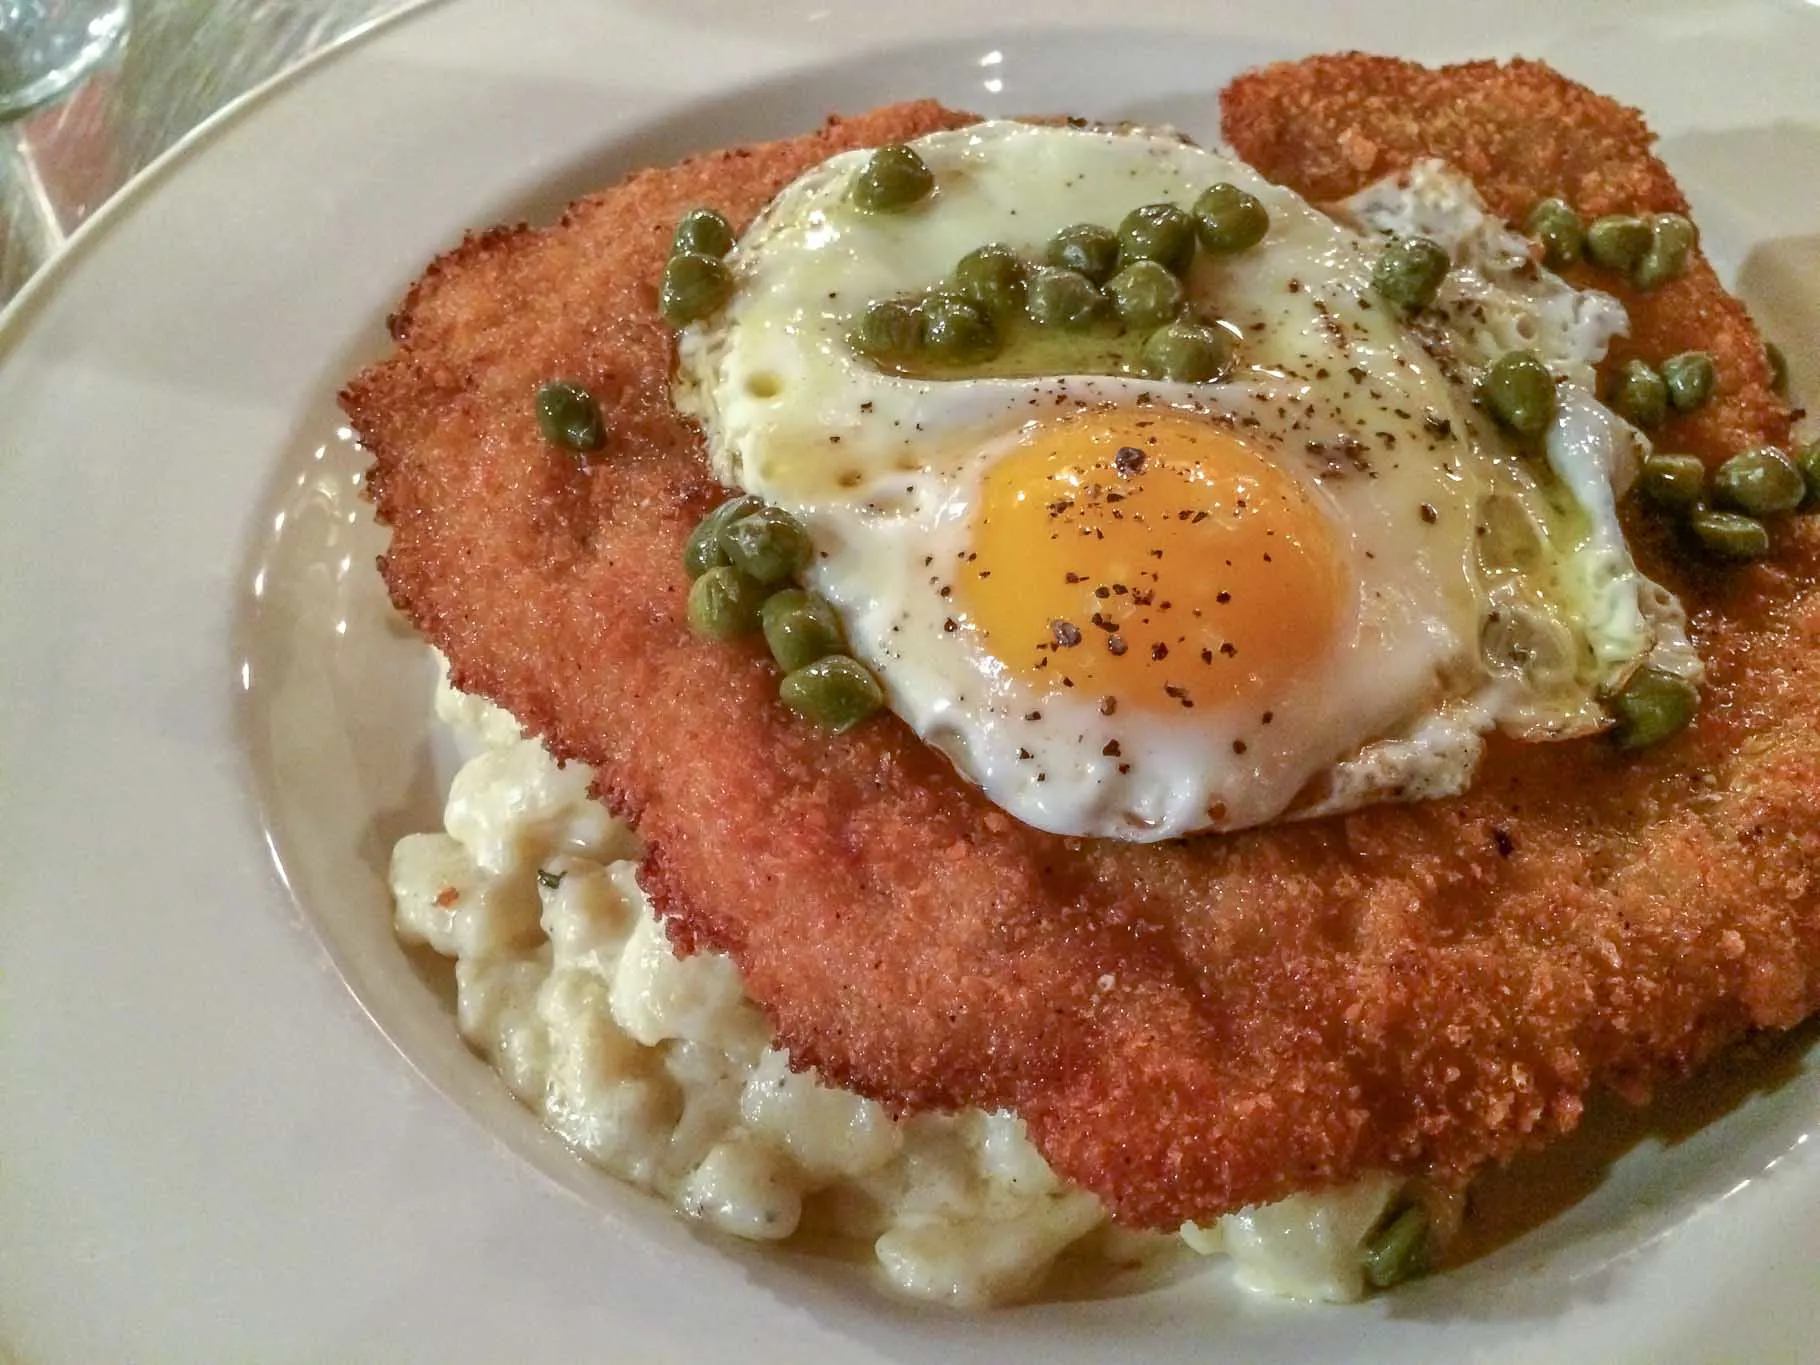 Schnitzel topped with fried egg 